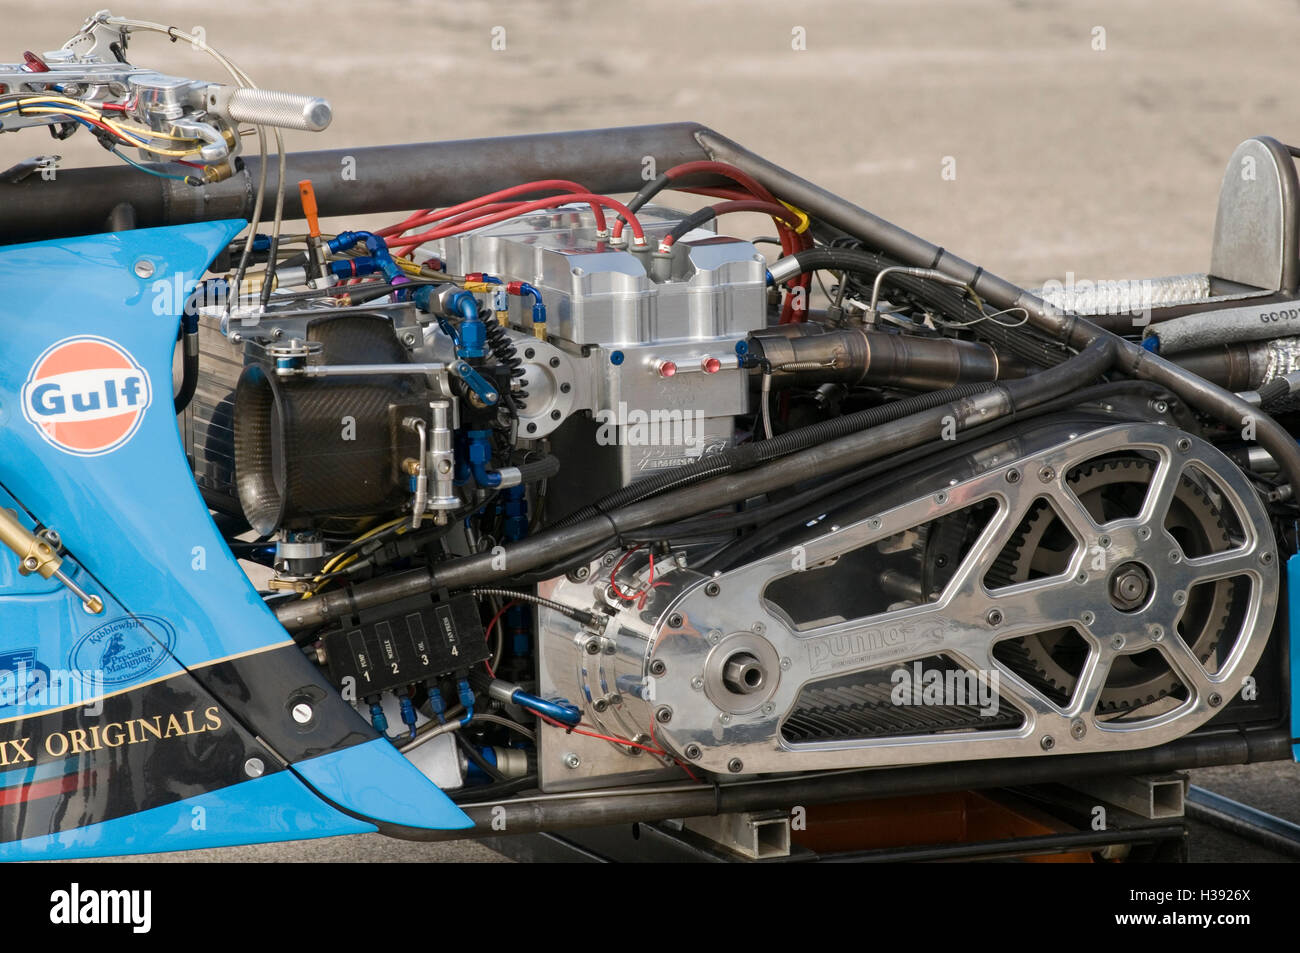 Ian King 10 time European Top Fuel Motorcycle drag racing  champion close up of the engine and clutch and supercharger Stock Photo